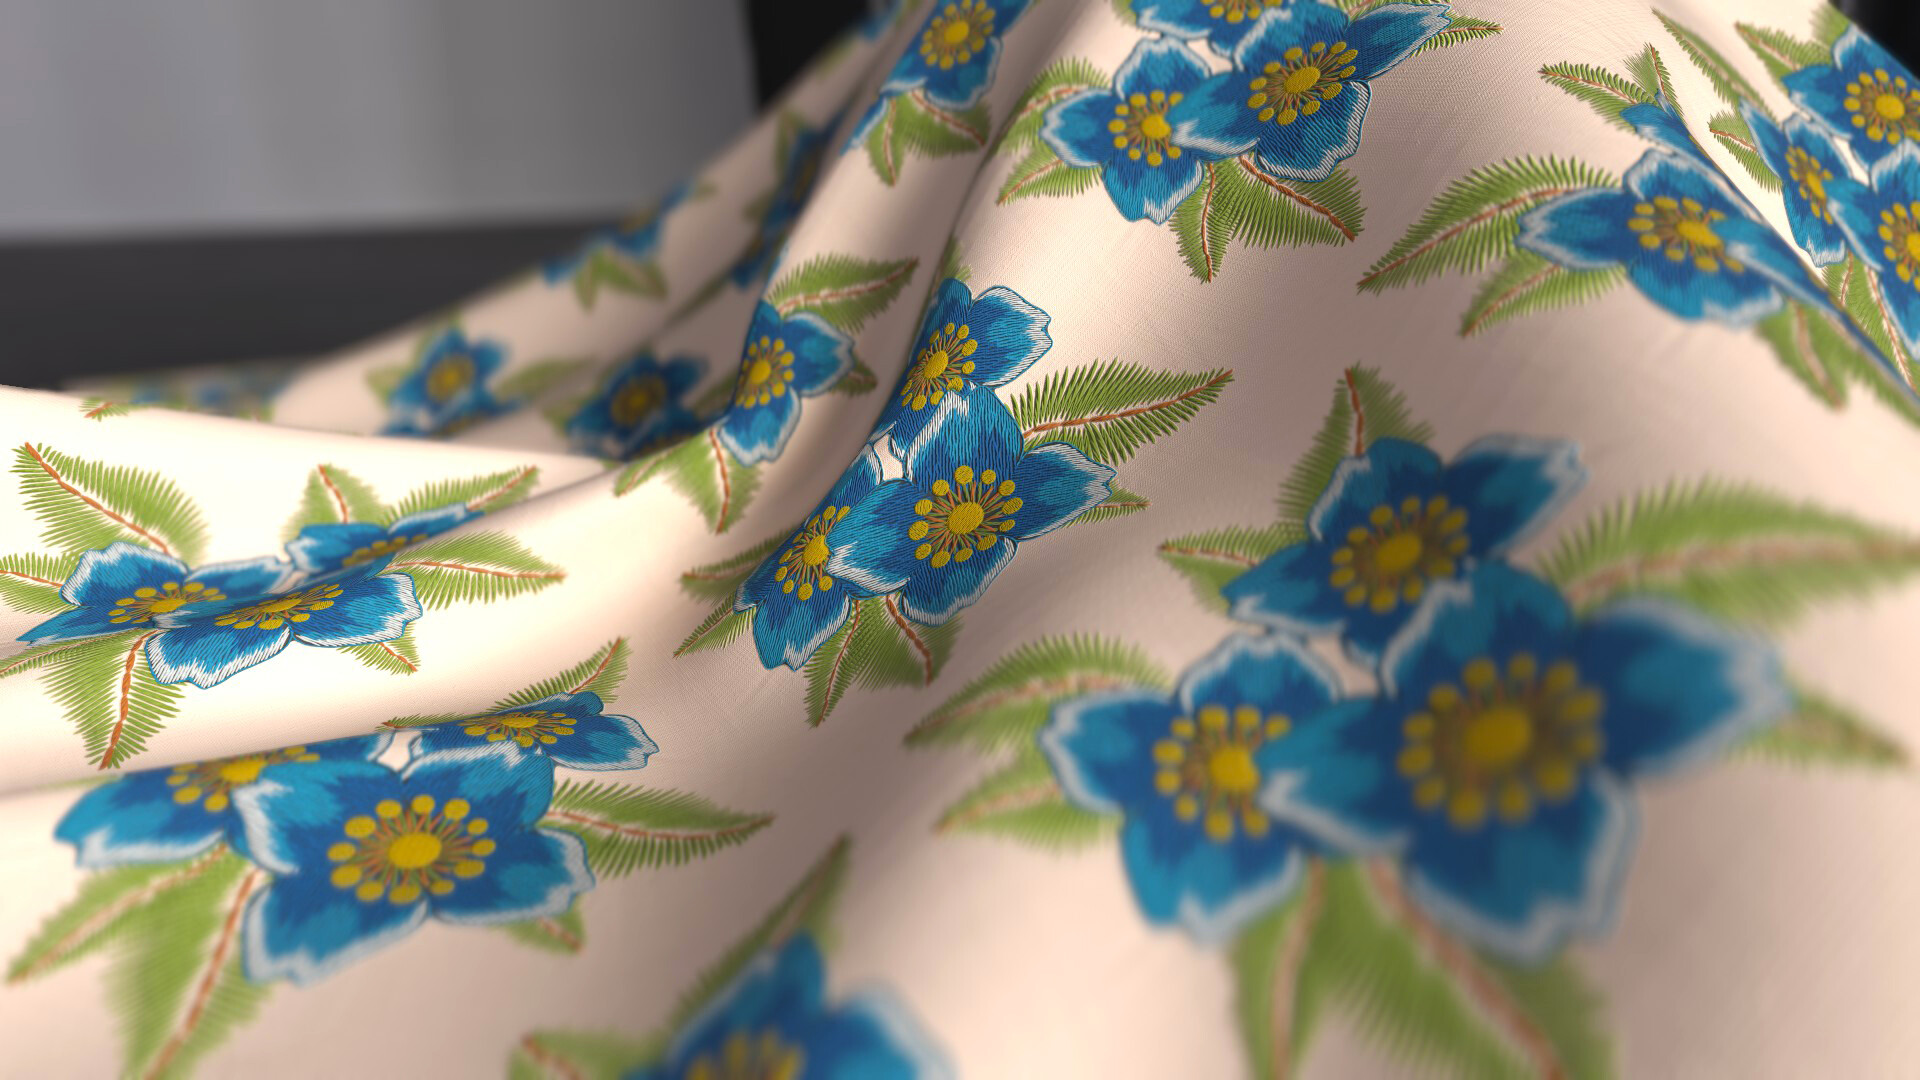 ArtStation - Floral Pattern for Fabric: Exploring the Beauty of